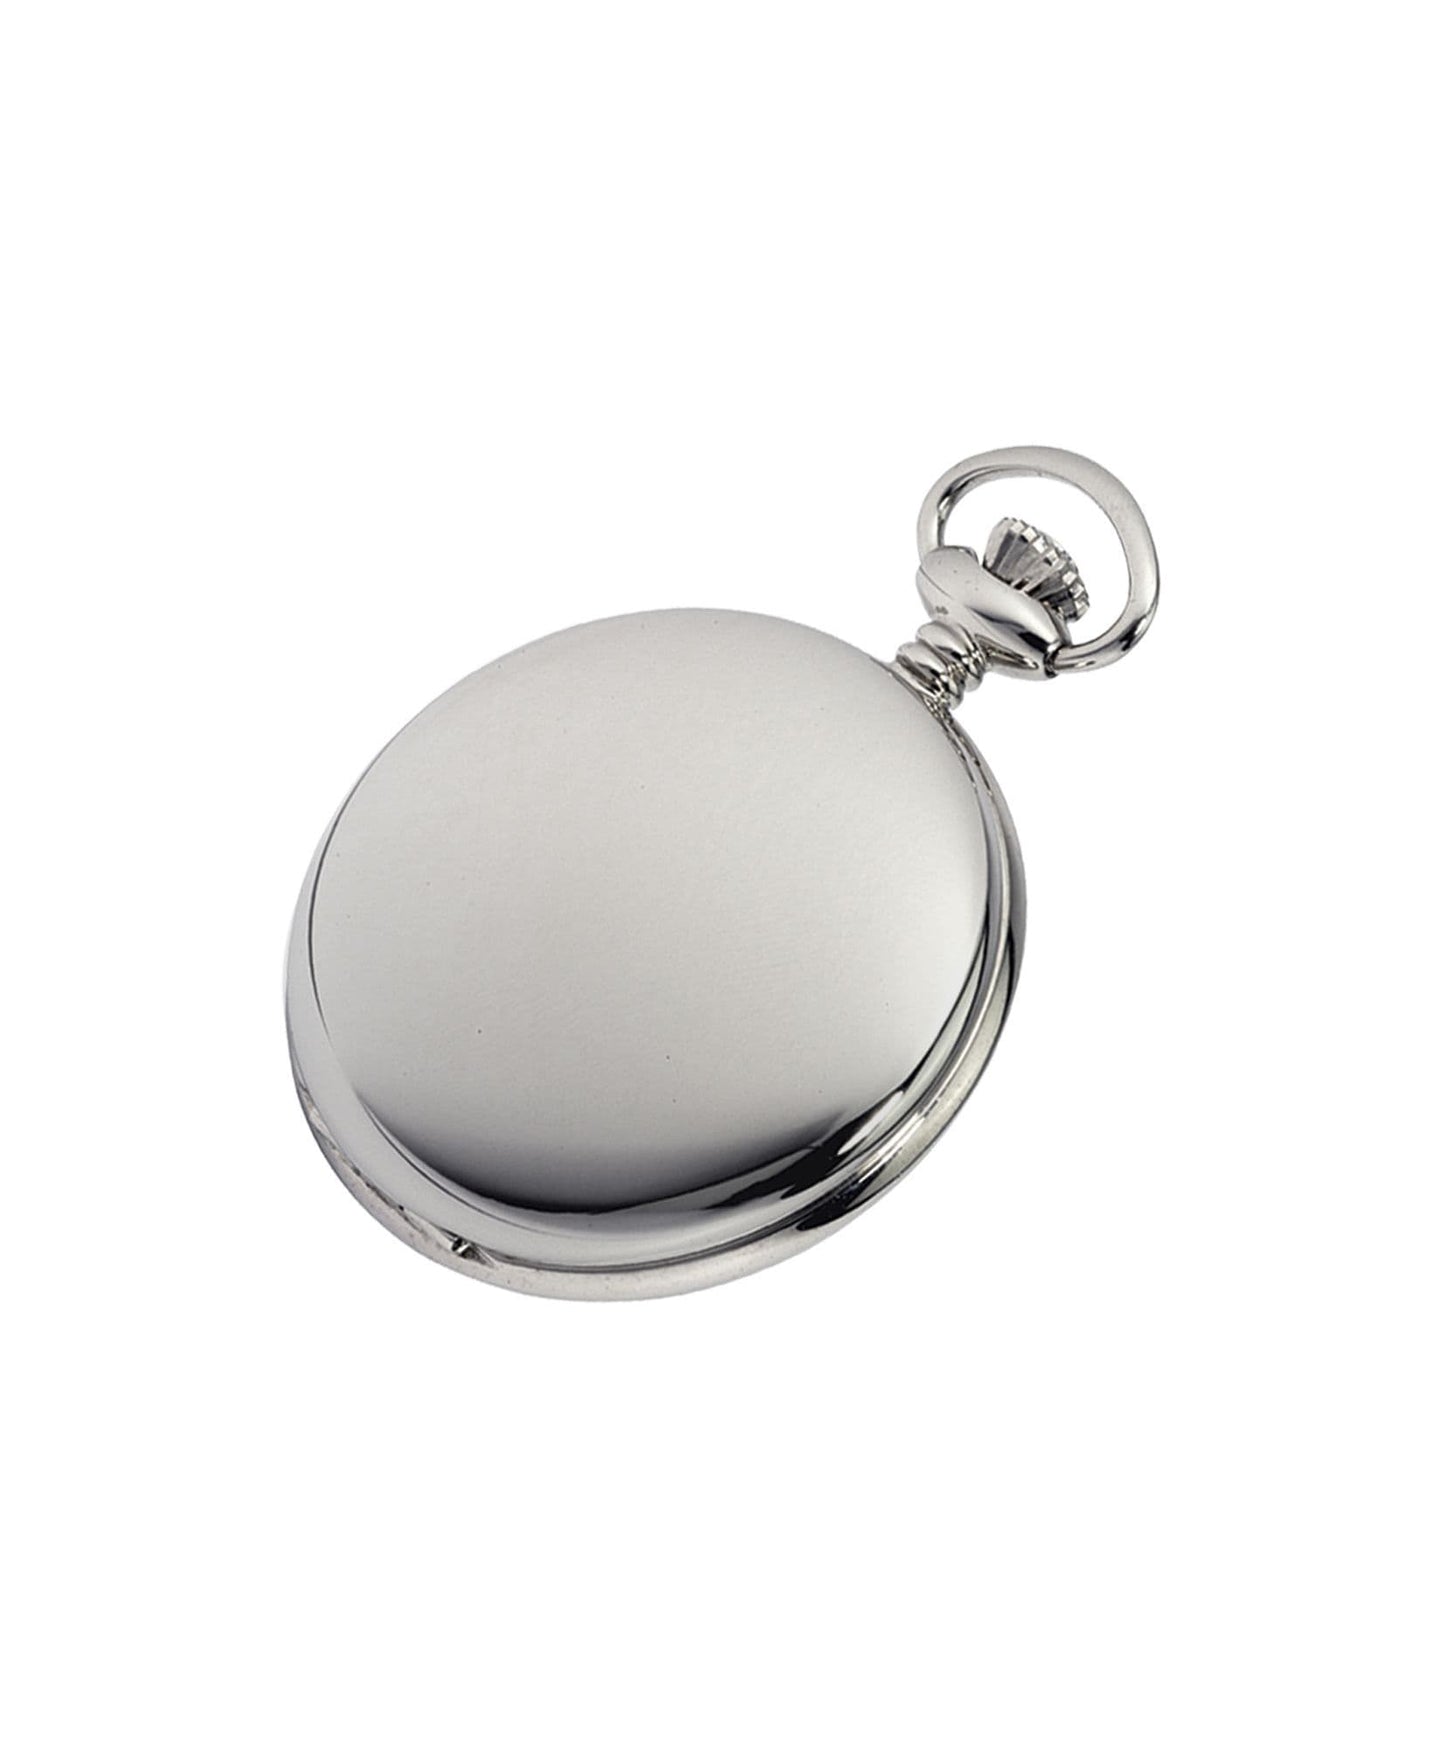 Mechanical Chrome Plated Polished Full Hunter Pocket Watch With Chain